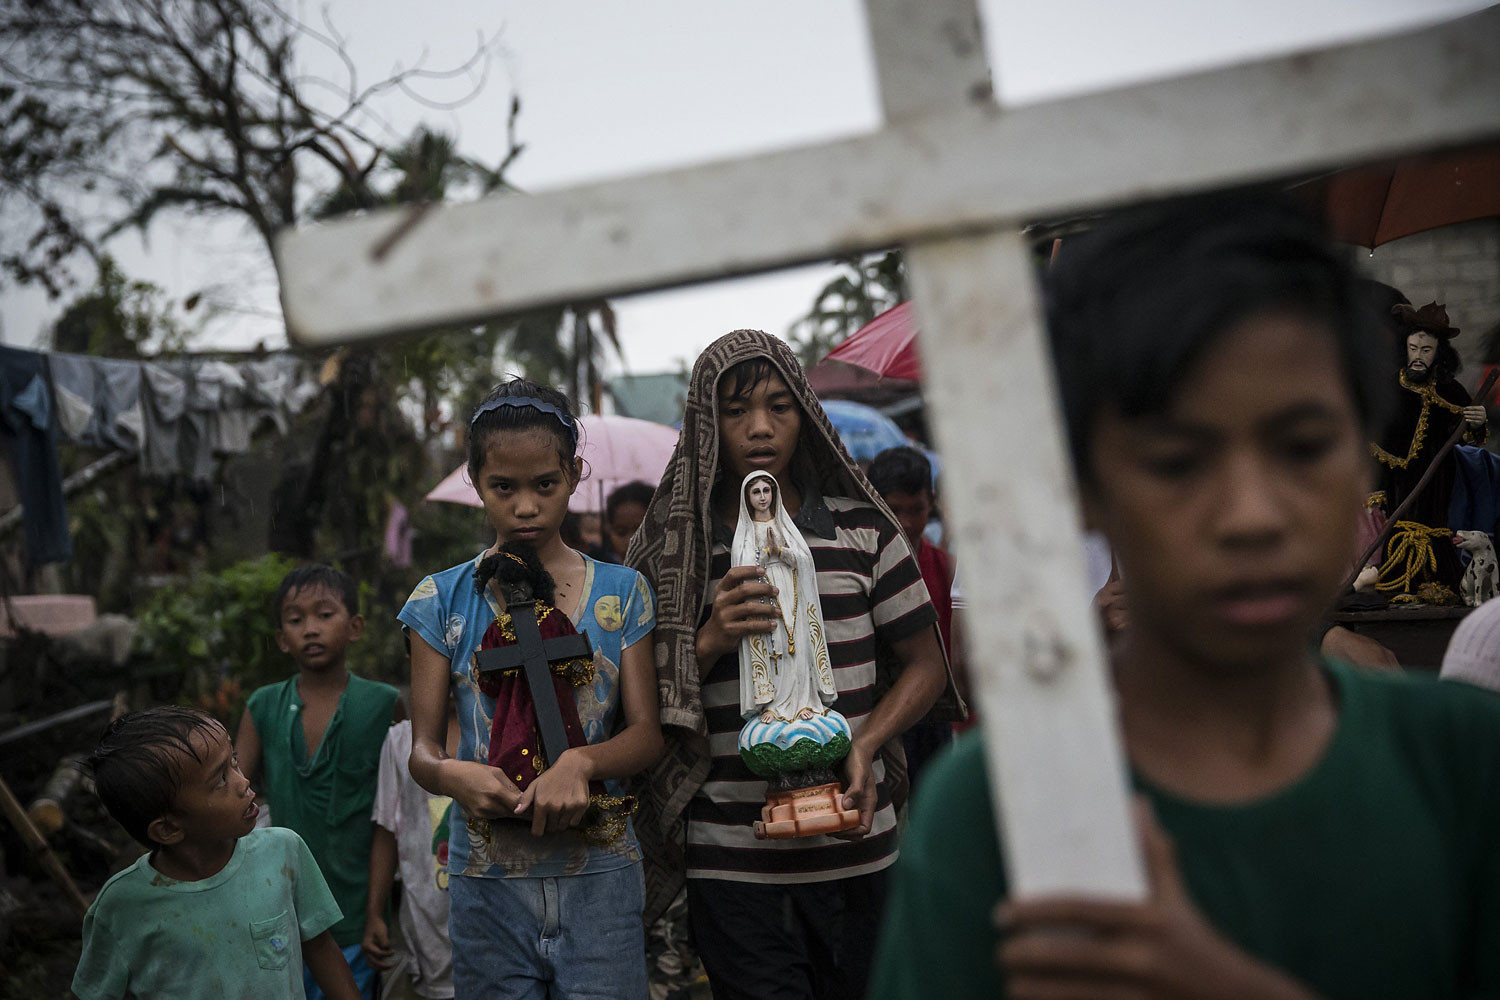 Villagers carry religious statues during a procession before taking part in a Latin mass ceremony at a local Chapel in Santa Rita township on November 22, 2013 in Eastern Samar, Philippines.